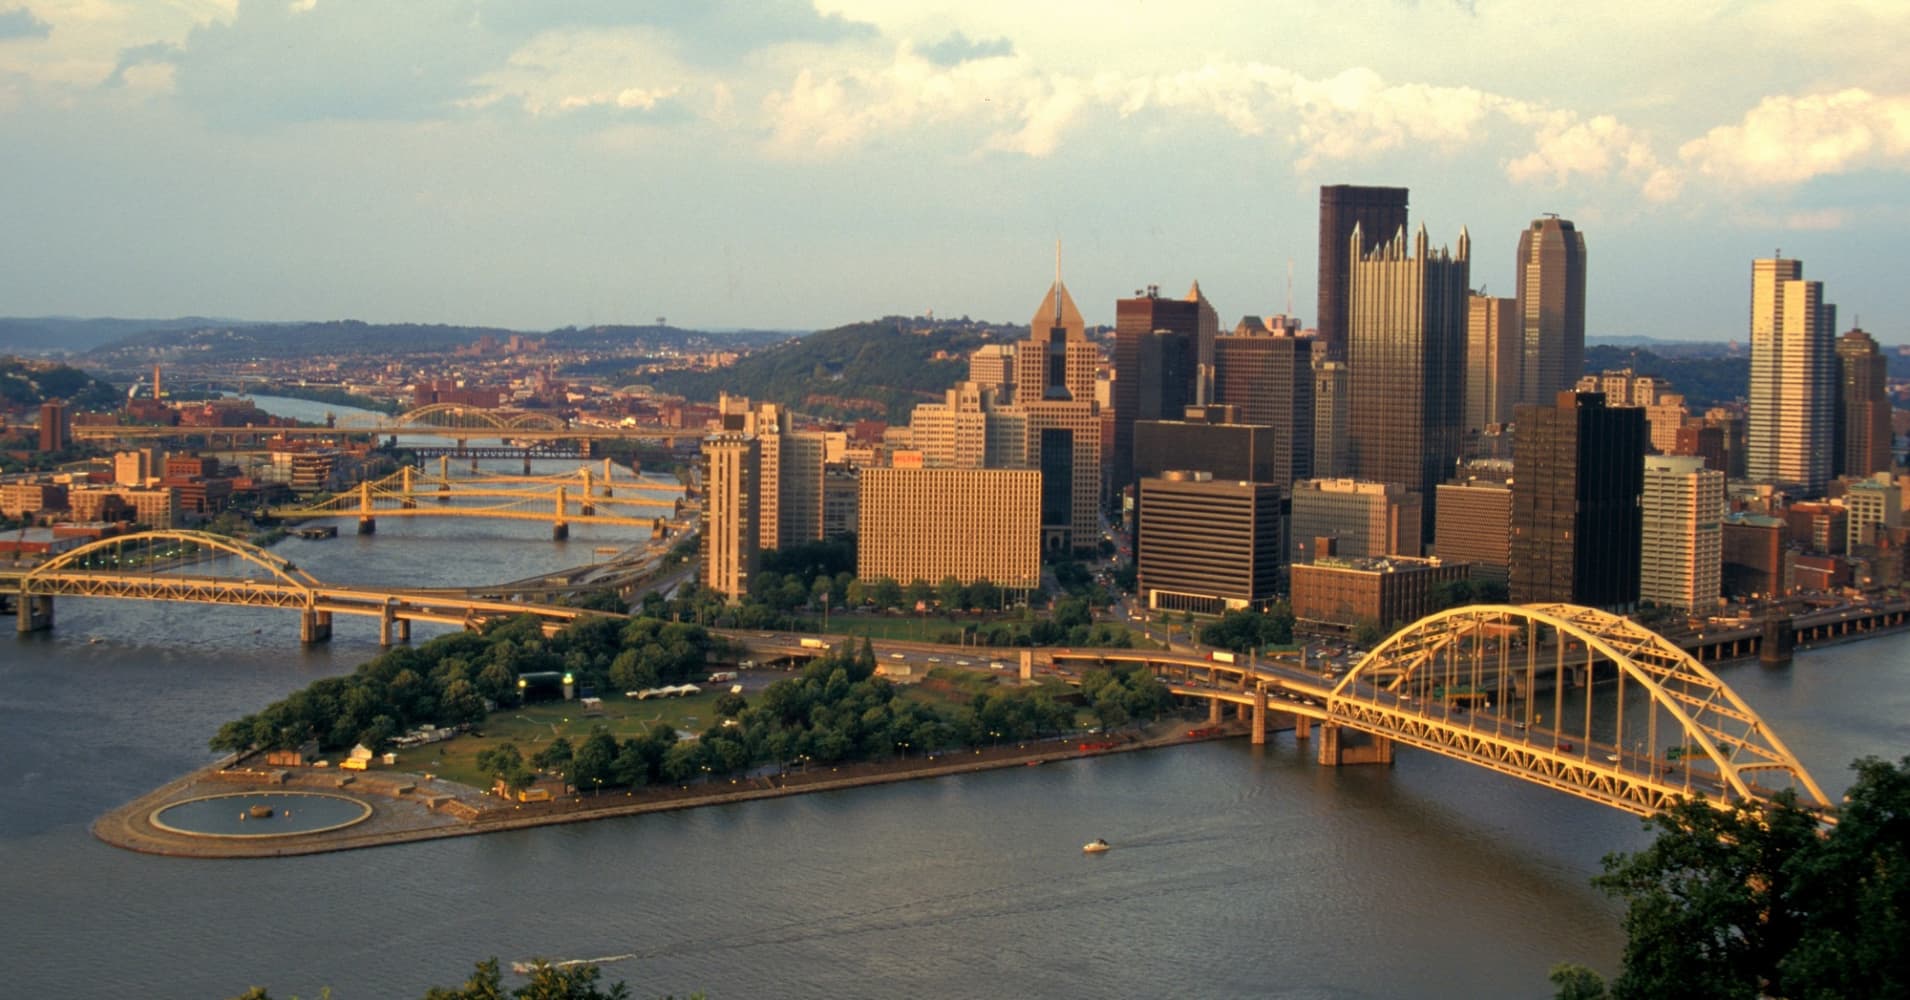 Among the best cities to retire, Pittsburgh comes out on top